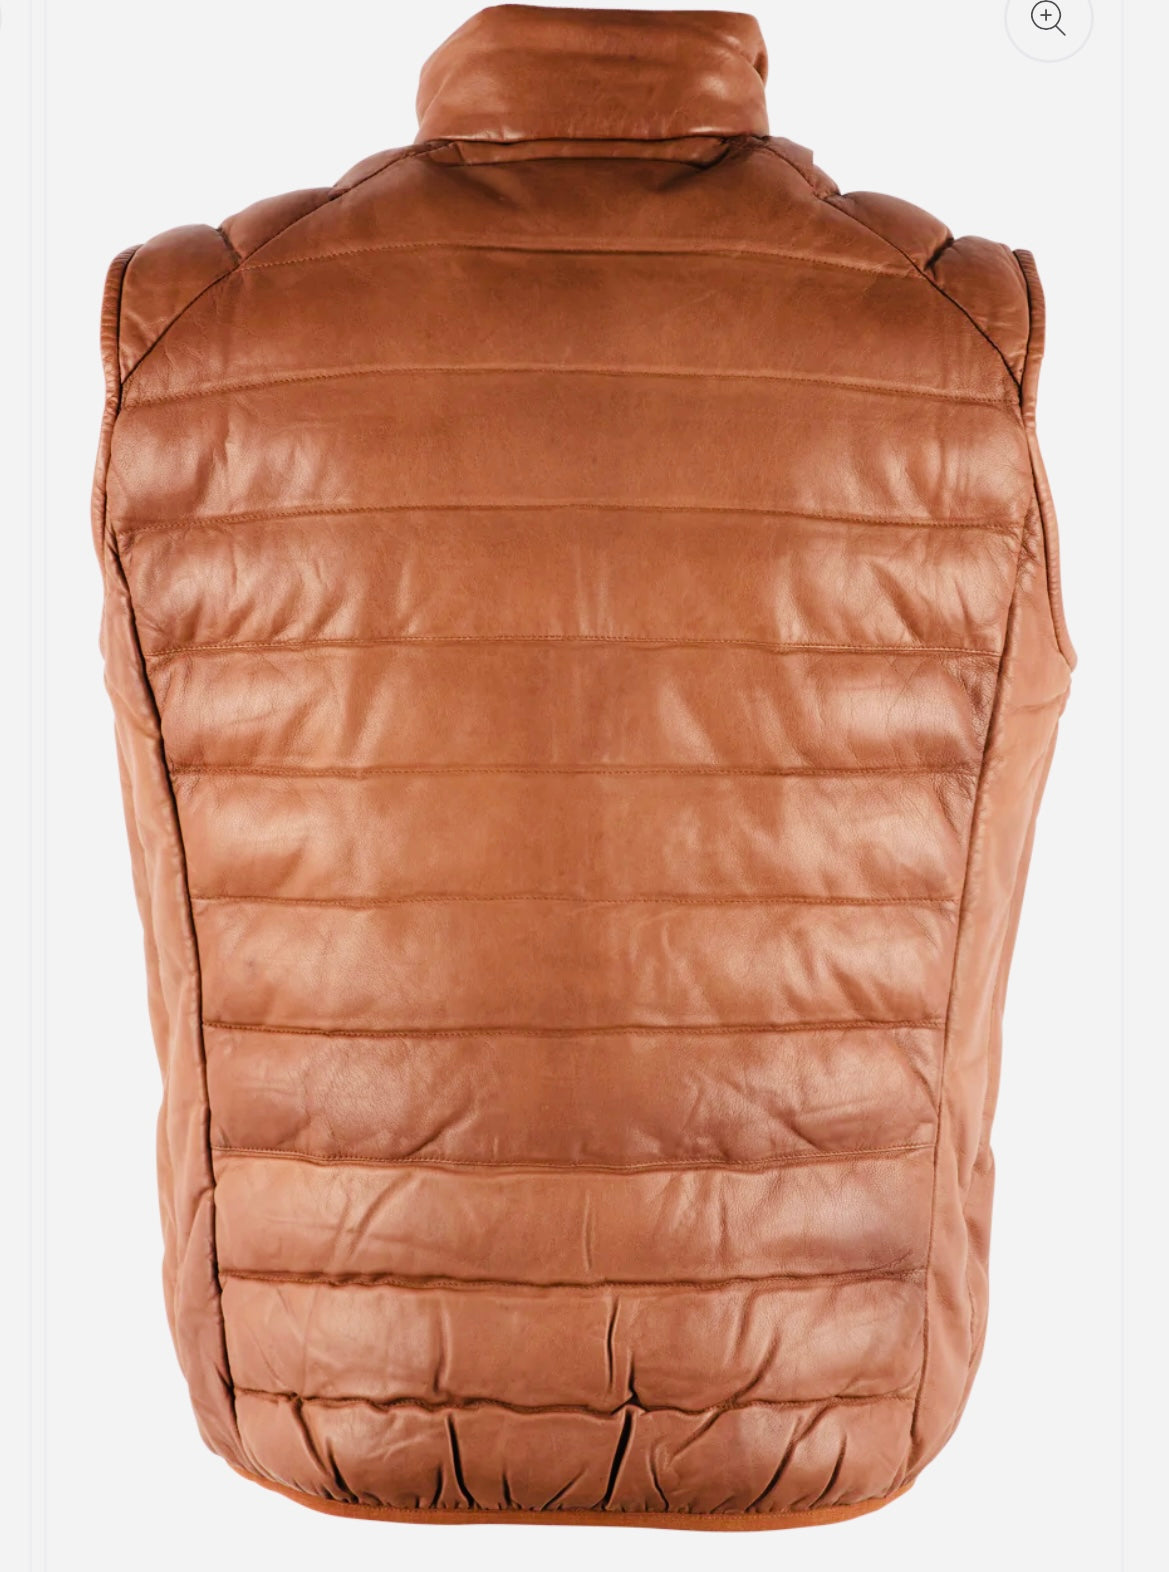 Puffy leather vest